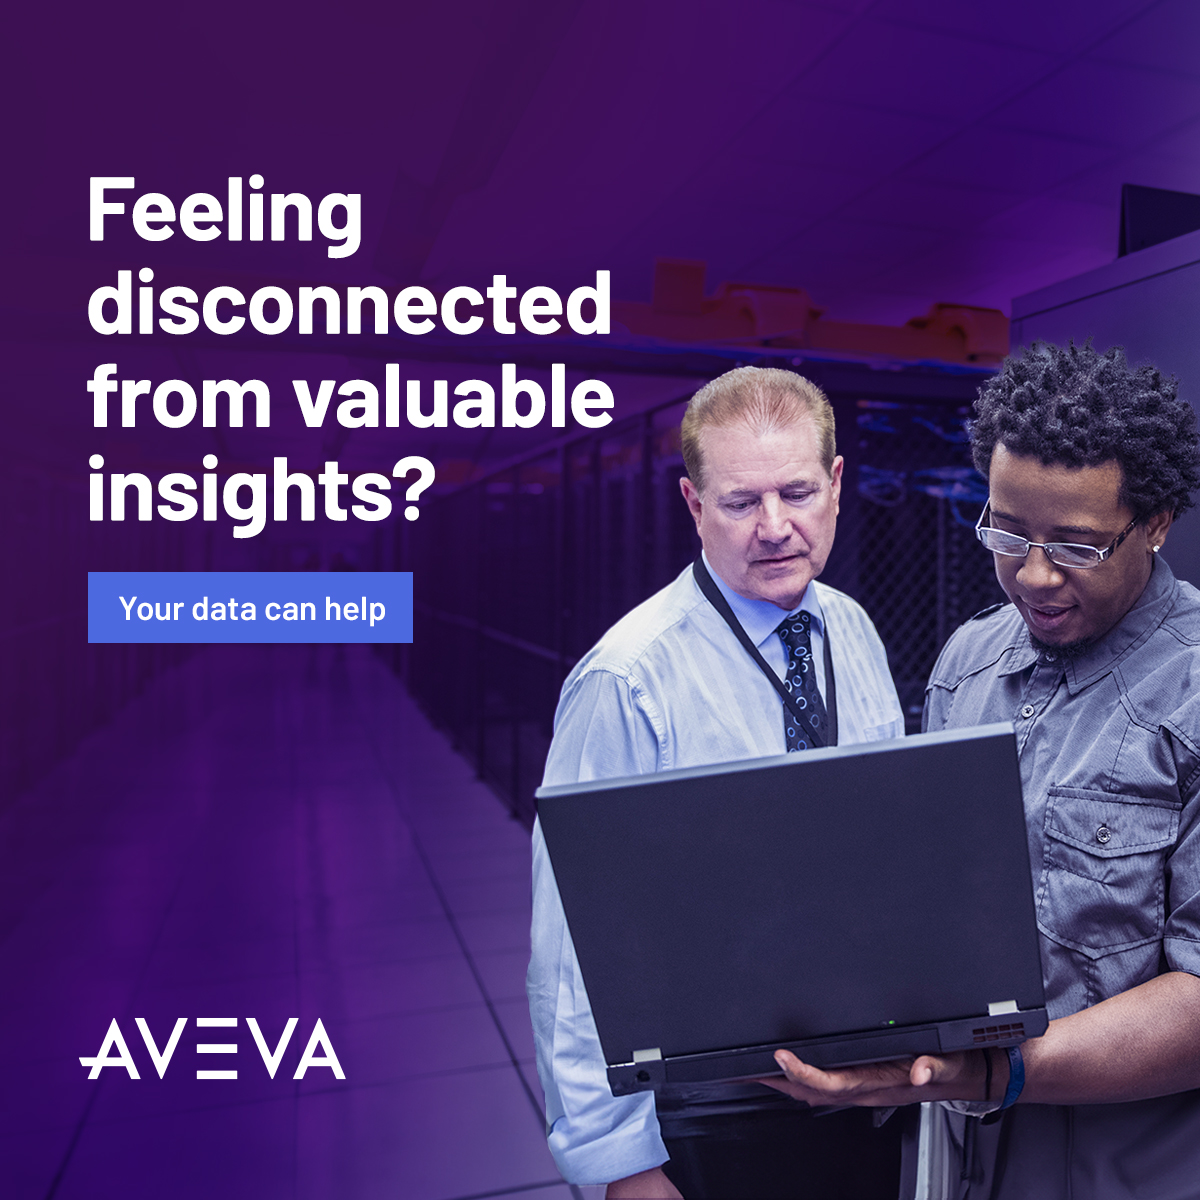 Bridge the gaps in your industrial 🏭 ecosystem and gain a 360° view of your #operations for faster, smarter business decisions.

Learn more about AVEVA Connect’s new features and advanced data services. Read the blog ➡️ bit.ly/3TvHlgc #cloud #datasharing #AVEVAConnect